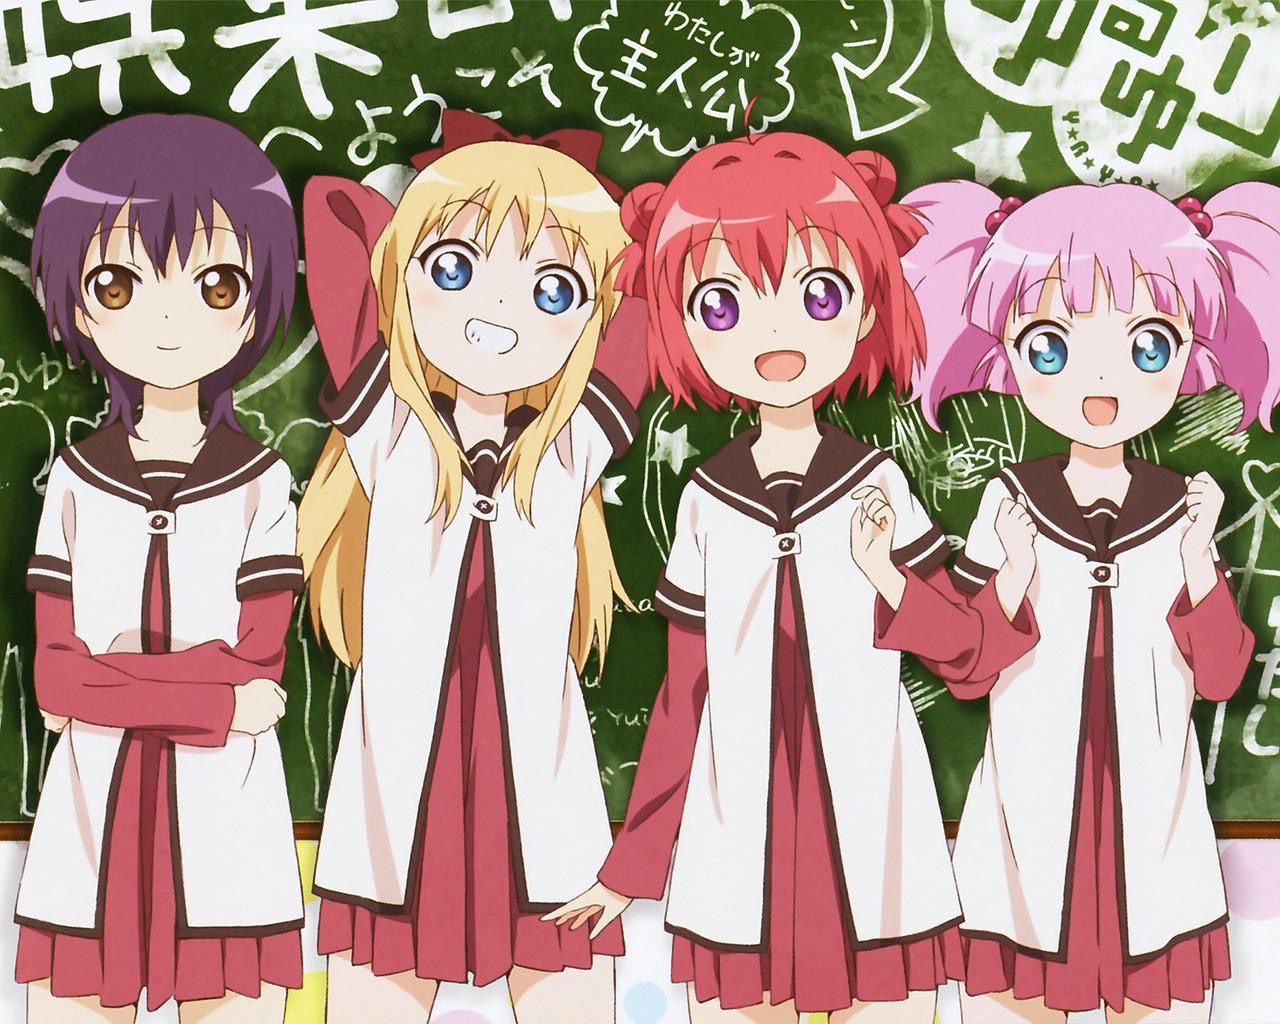 『Yuruyuri』 cute as Moe Moe www heal the stresses of everyday life and looking at the image corners 14